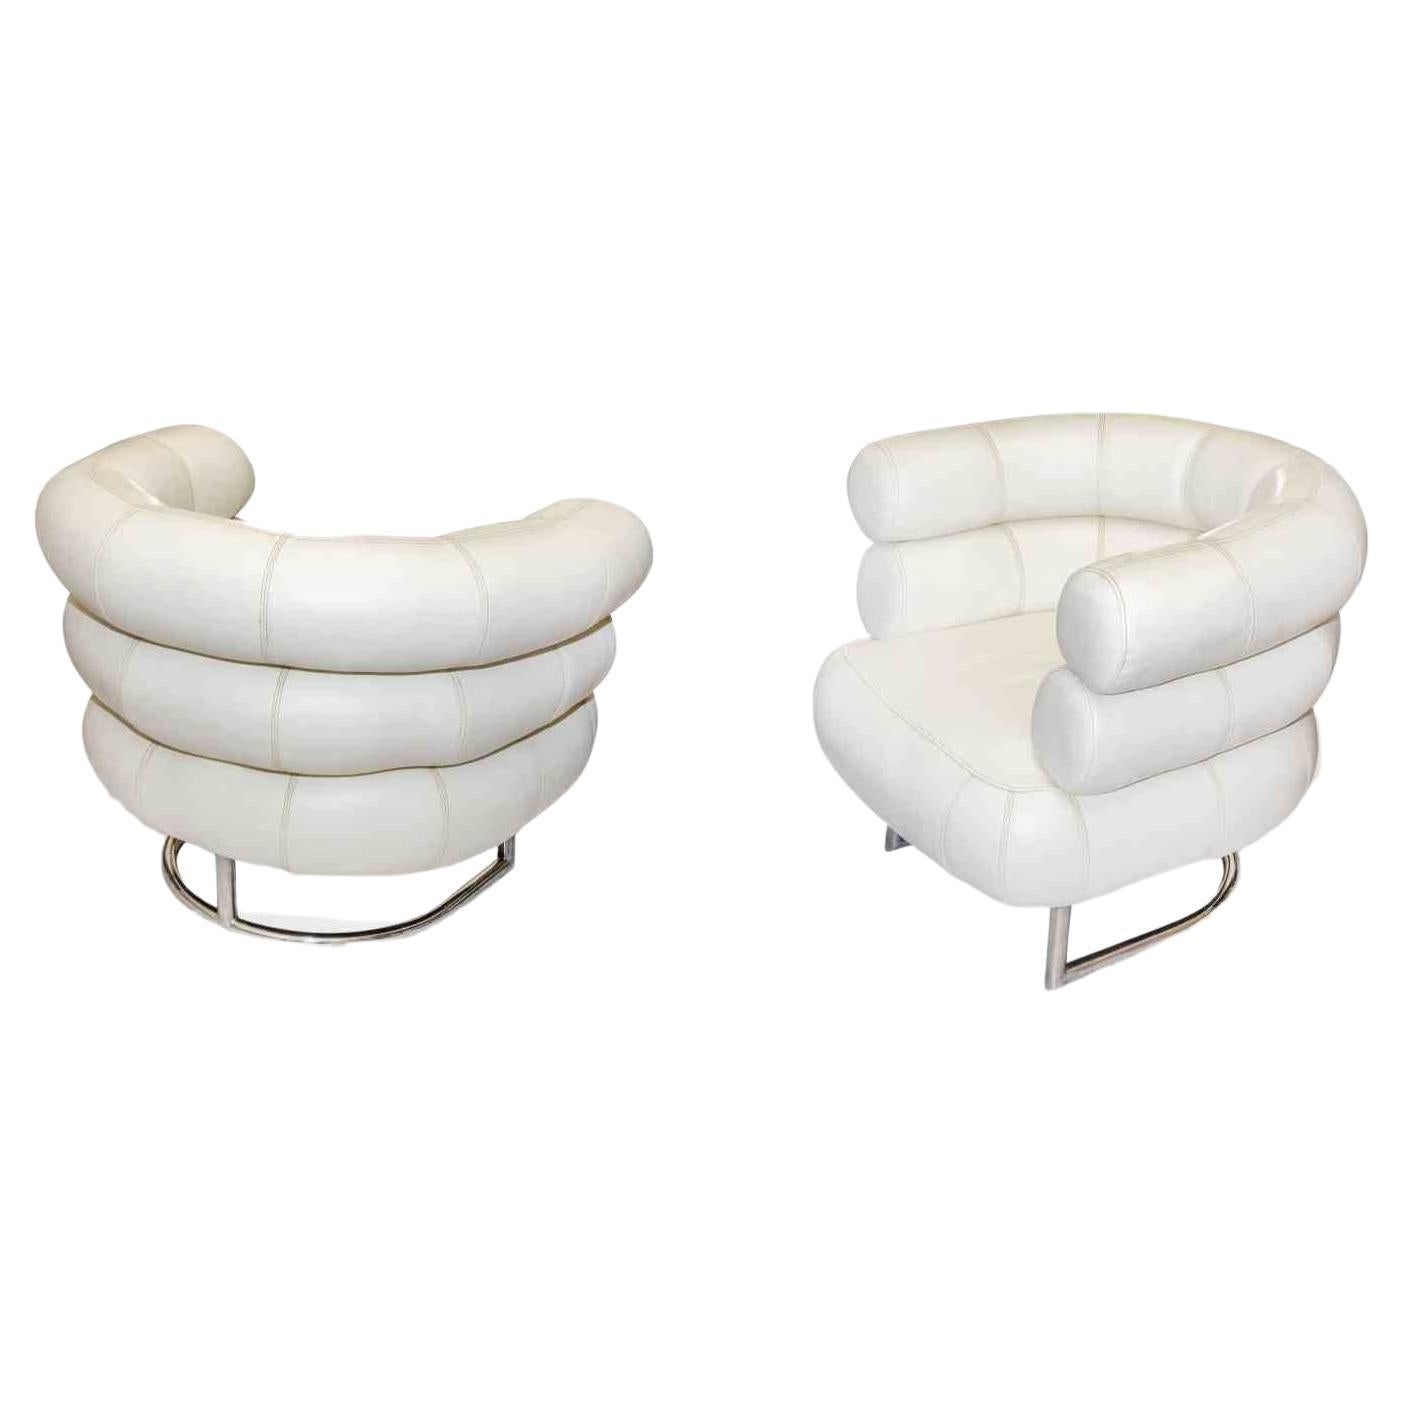 Bibendum Armchairs is an original design item realized by Eileen Gray.

Polished chromium plated tubular steel base.

Fully original 1970s upholstered seat, back and armrests covered white leather.

Eileen Gray used this chair in a few of her